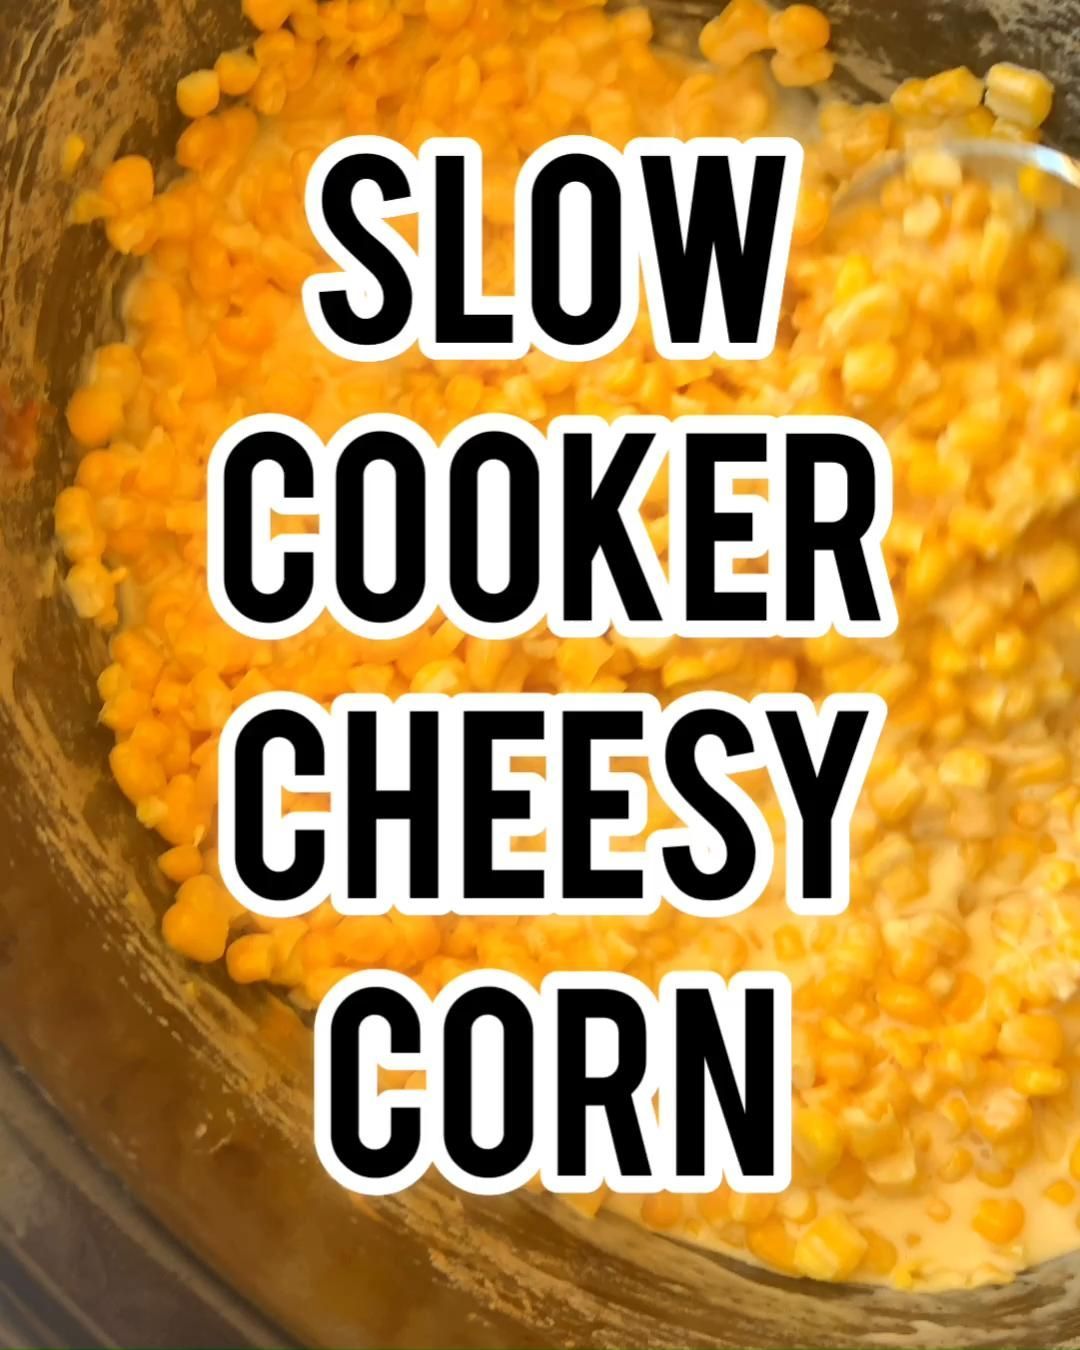 Slow Cooker Cheesy Corn -   25 thanksgiving desserts for a crowd videos ideas